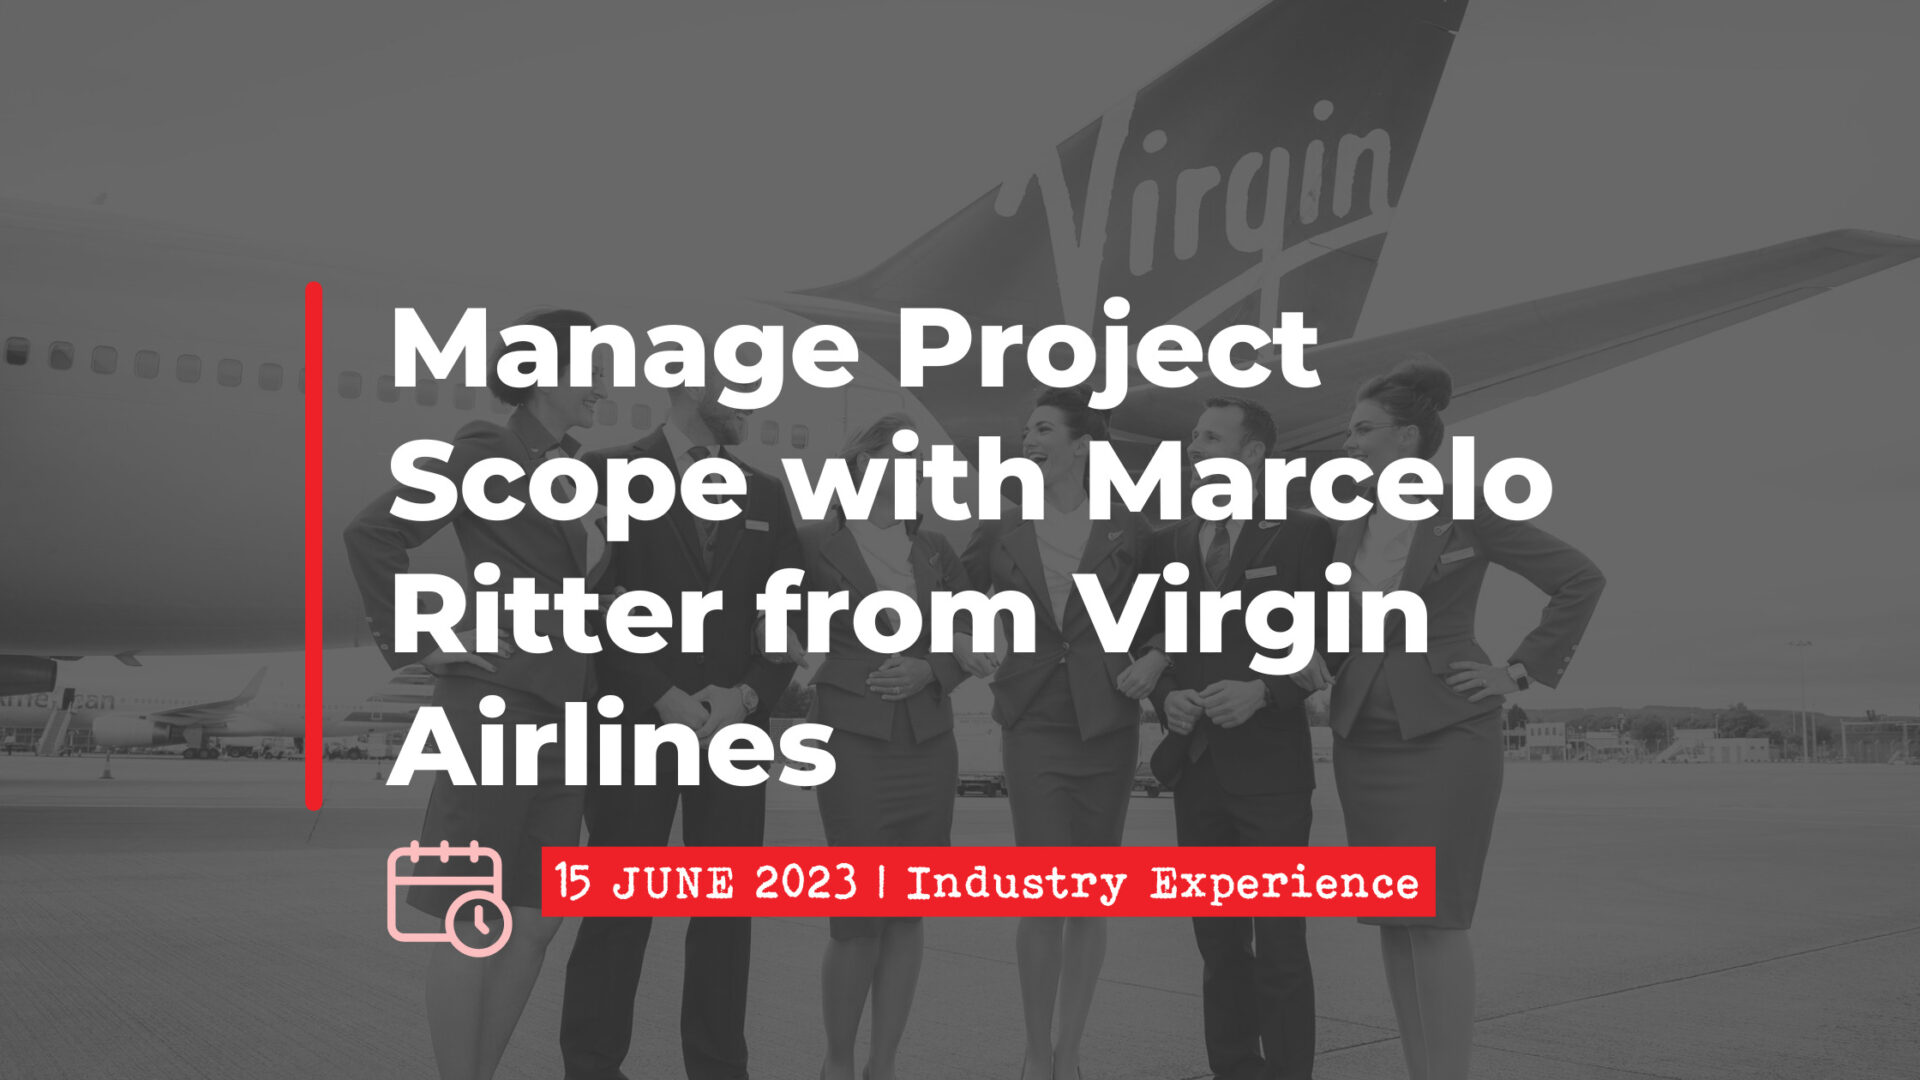 15 June 2023: Manage Project Scope with Marcelo Ritter from Virgin Airlines